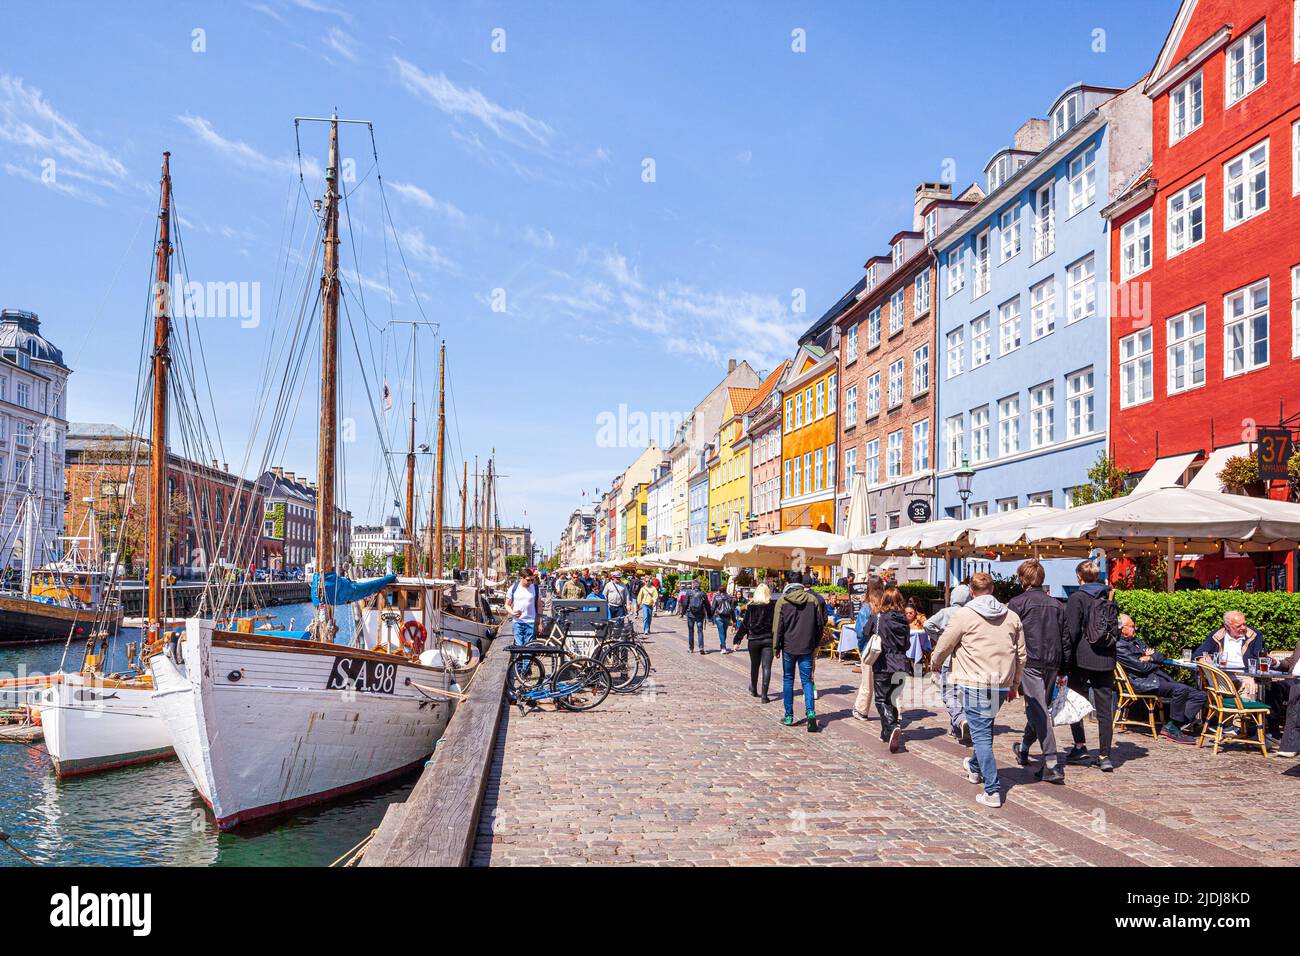 Alfresco cafes at Nyhavn, the colourful 17th-century canal waterfront in Copenhagen, Denmark. Stock Photo